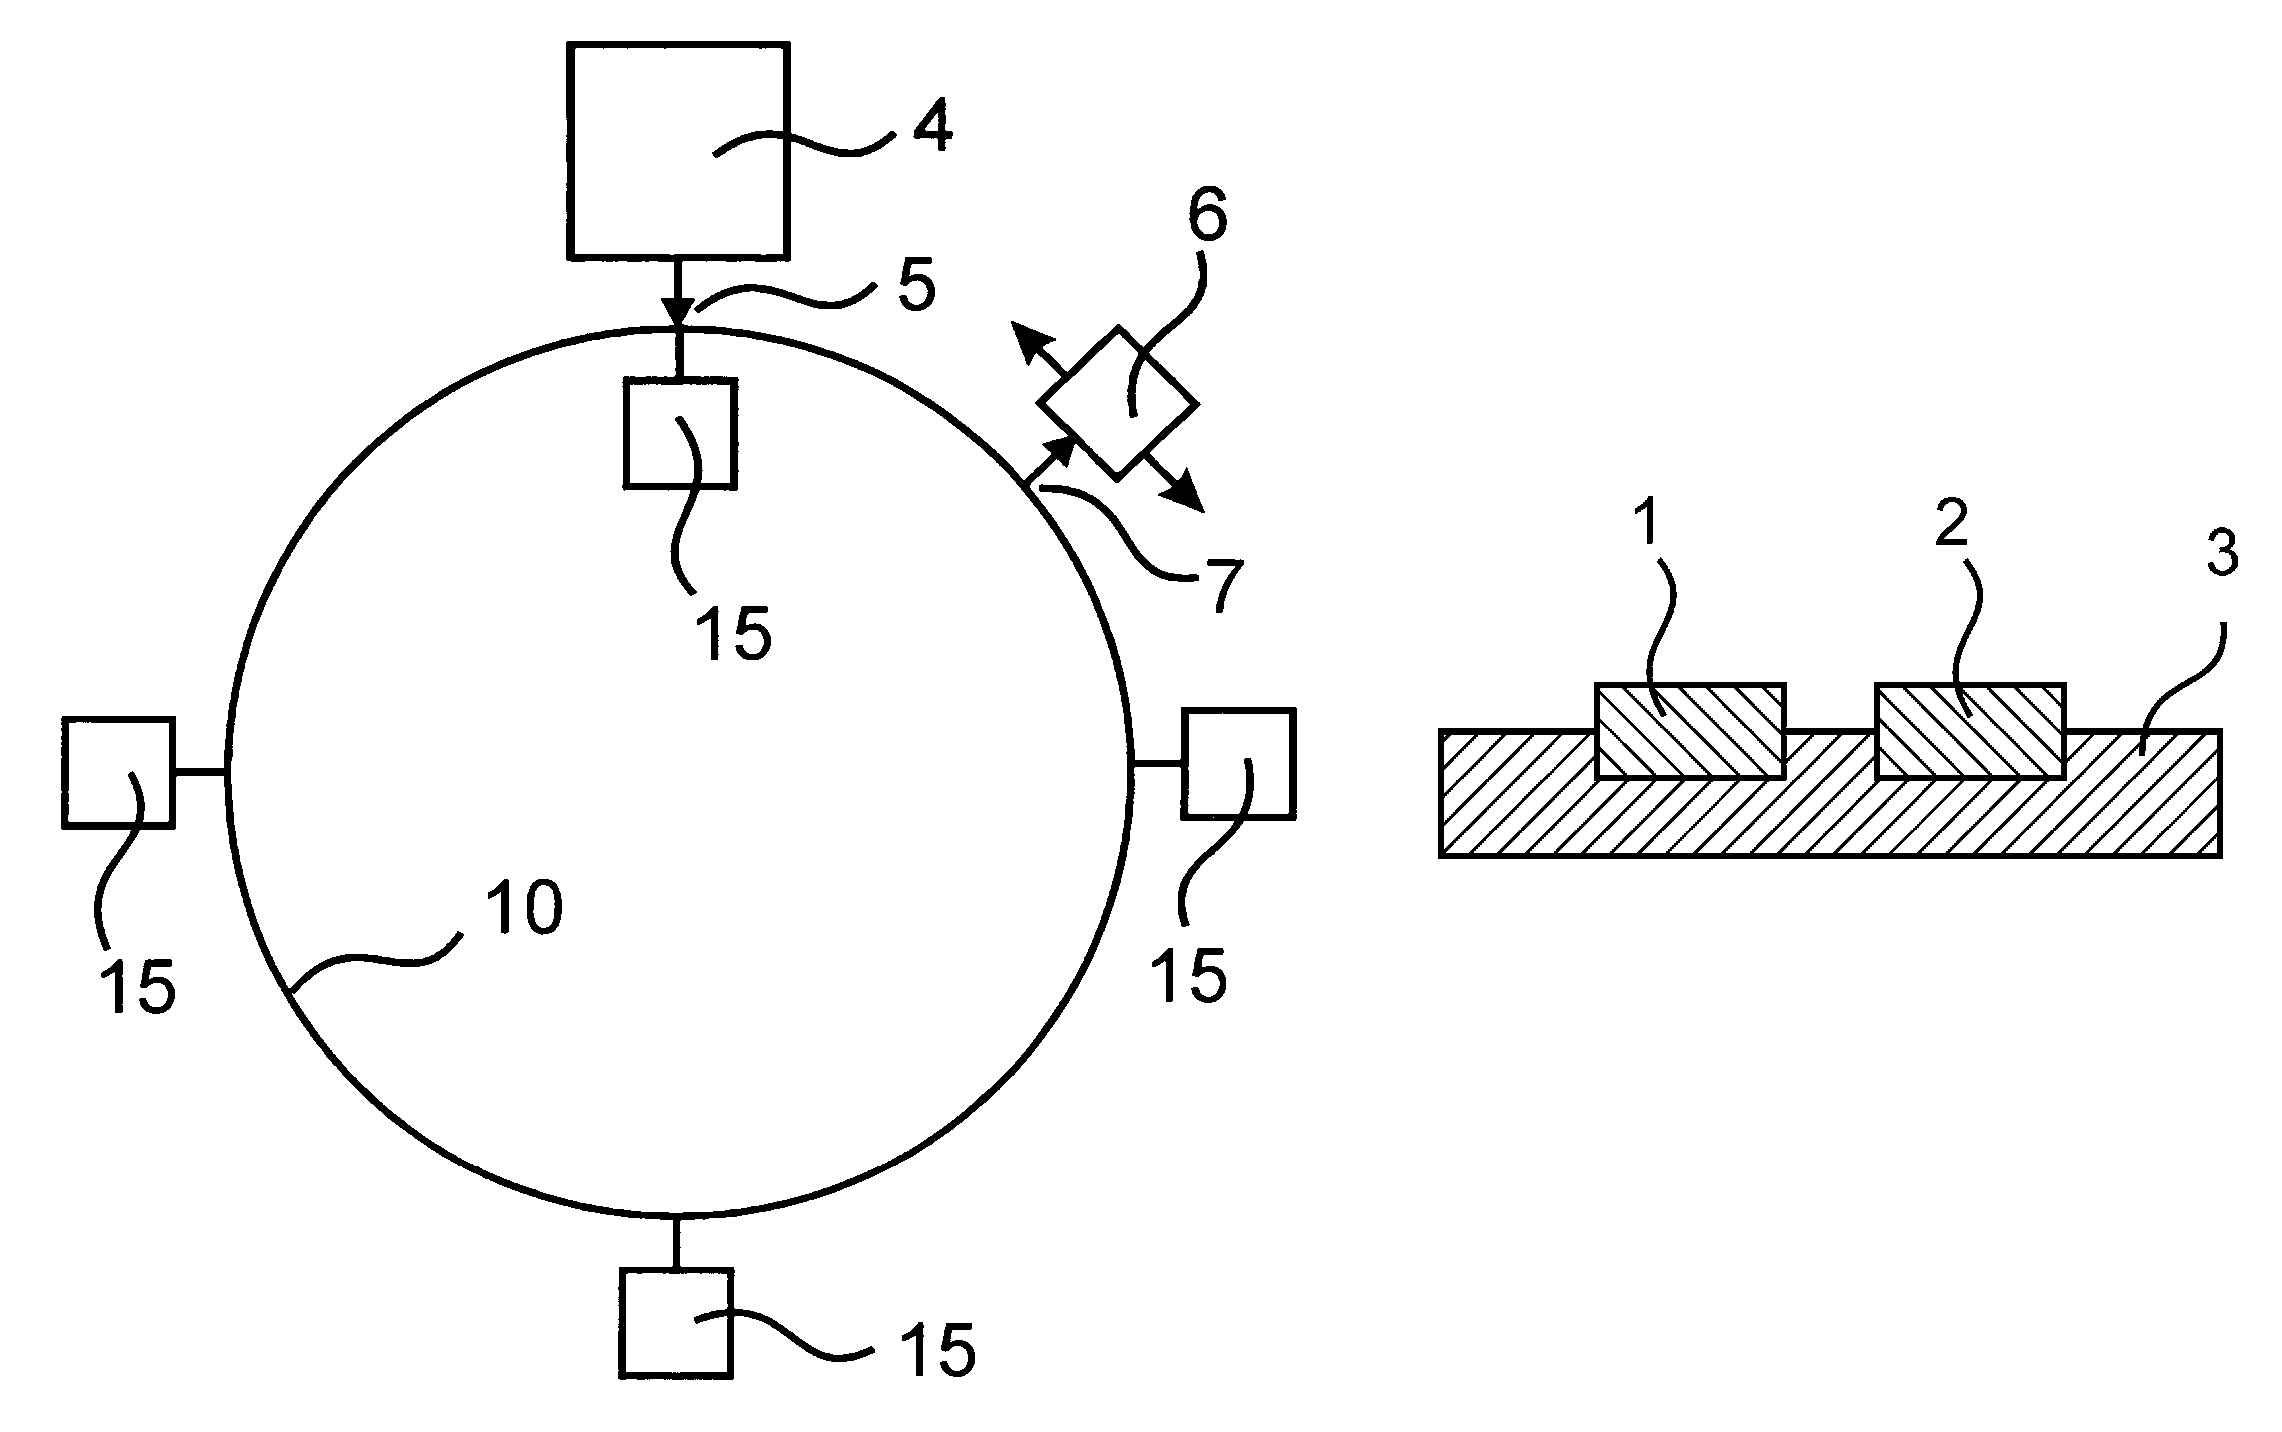 Slipring with a slide track formed as a closed circuit of electrically resistant material